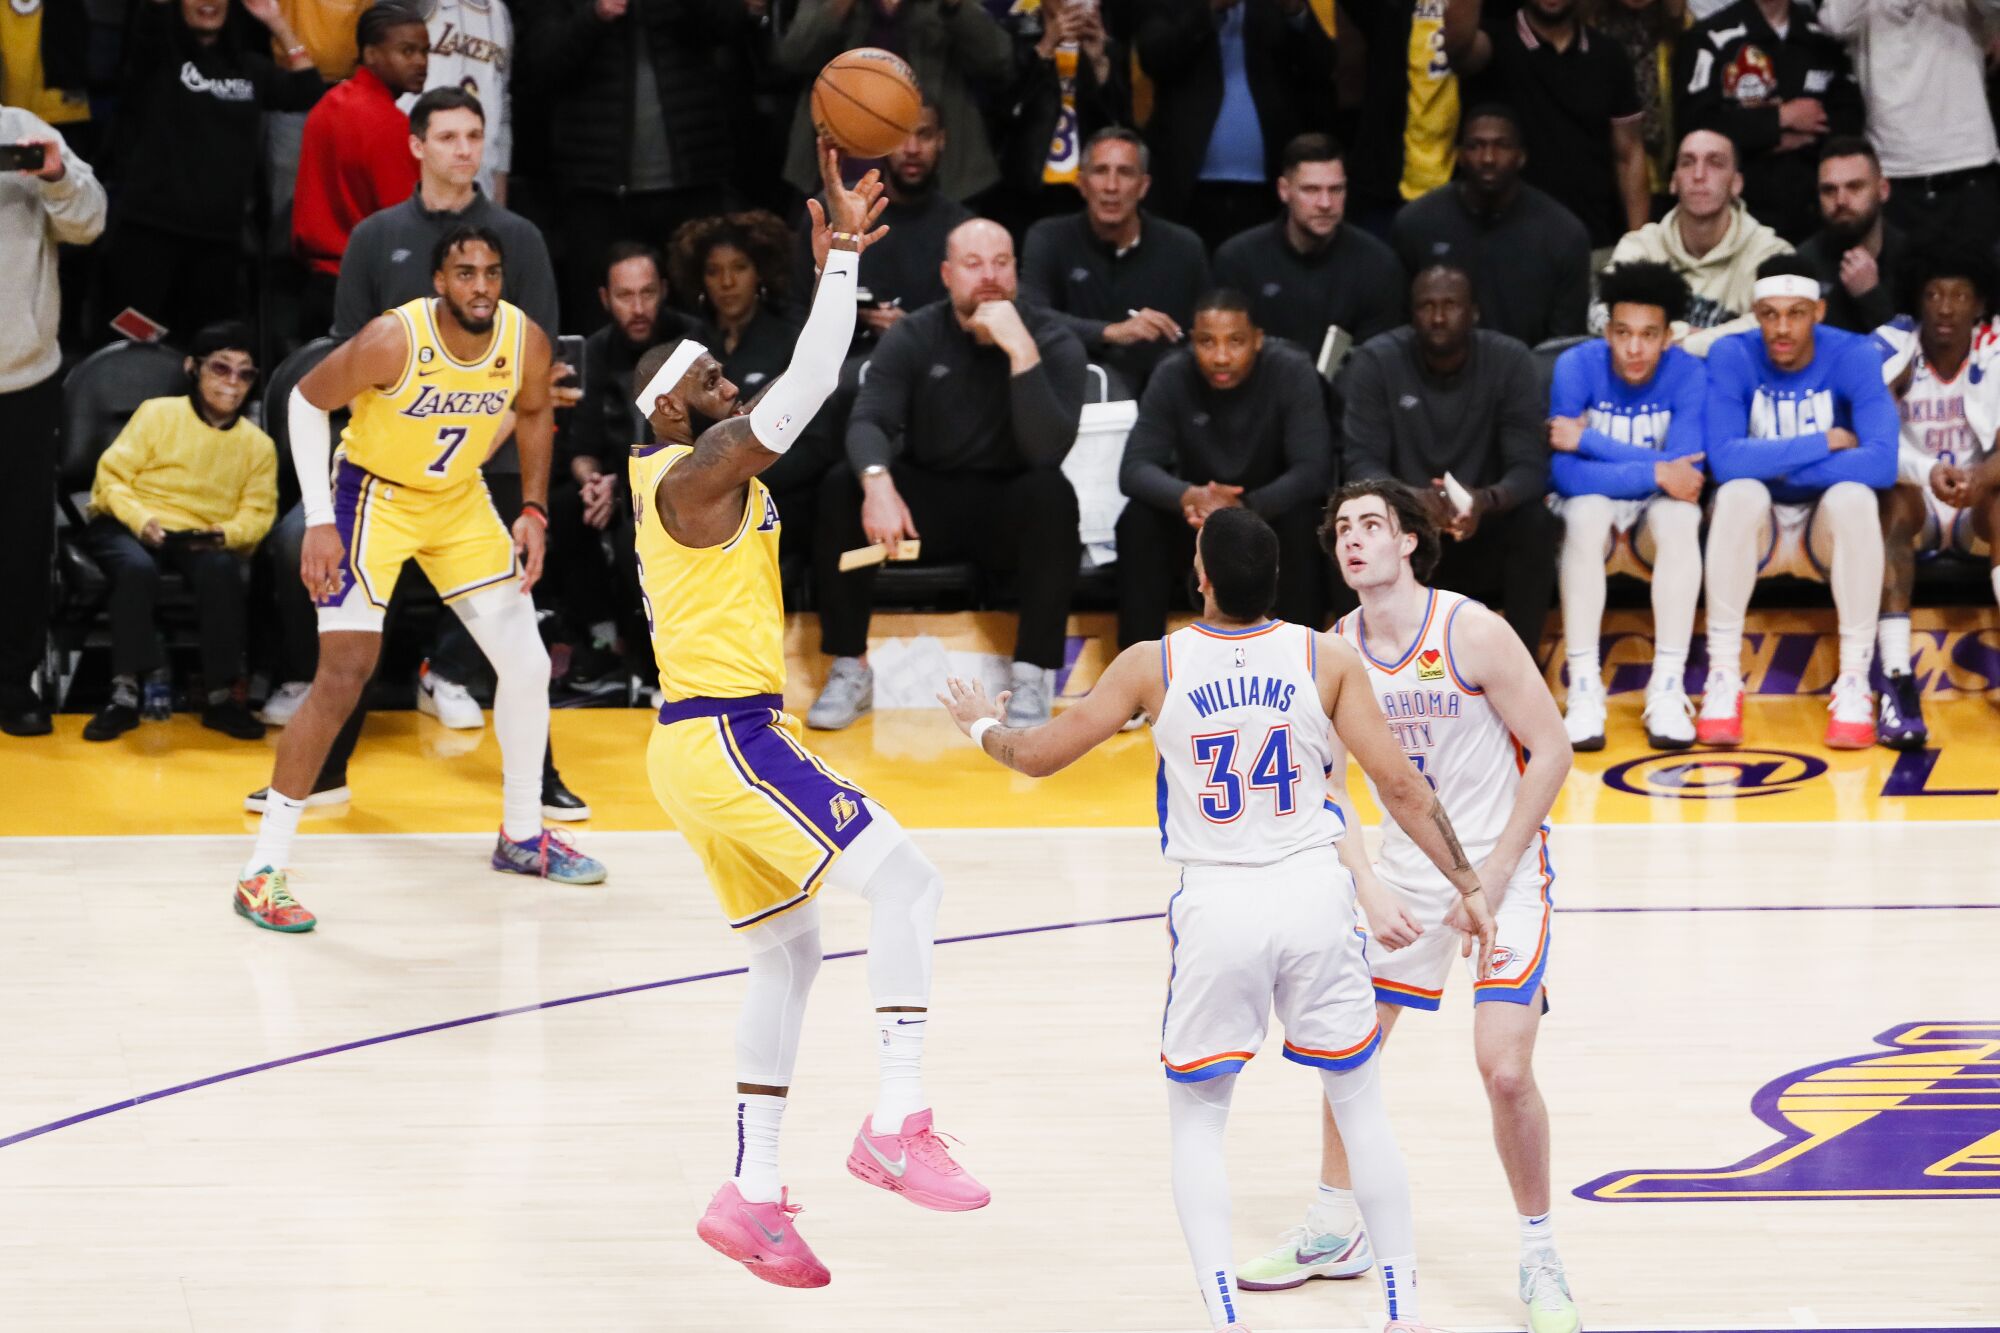 Lakers forward LeBron James releases the step-back fadeaway jumper that became the basket that made him the scoring leader.